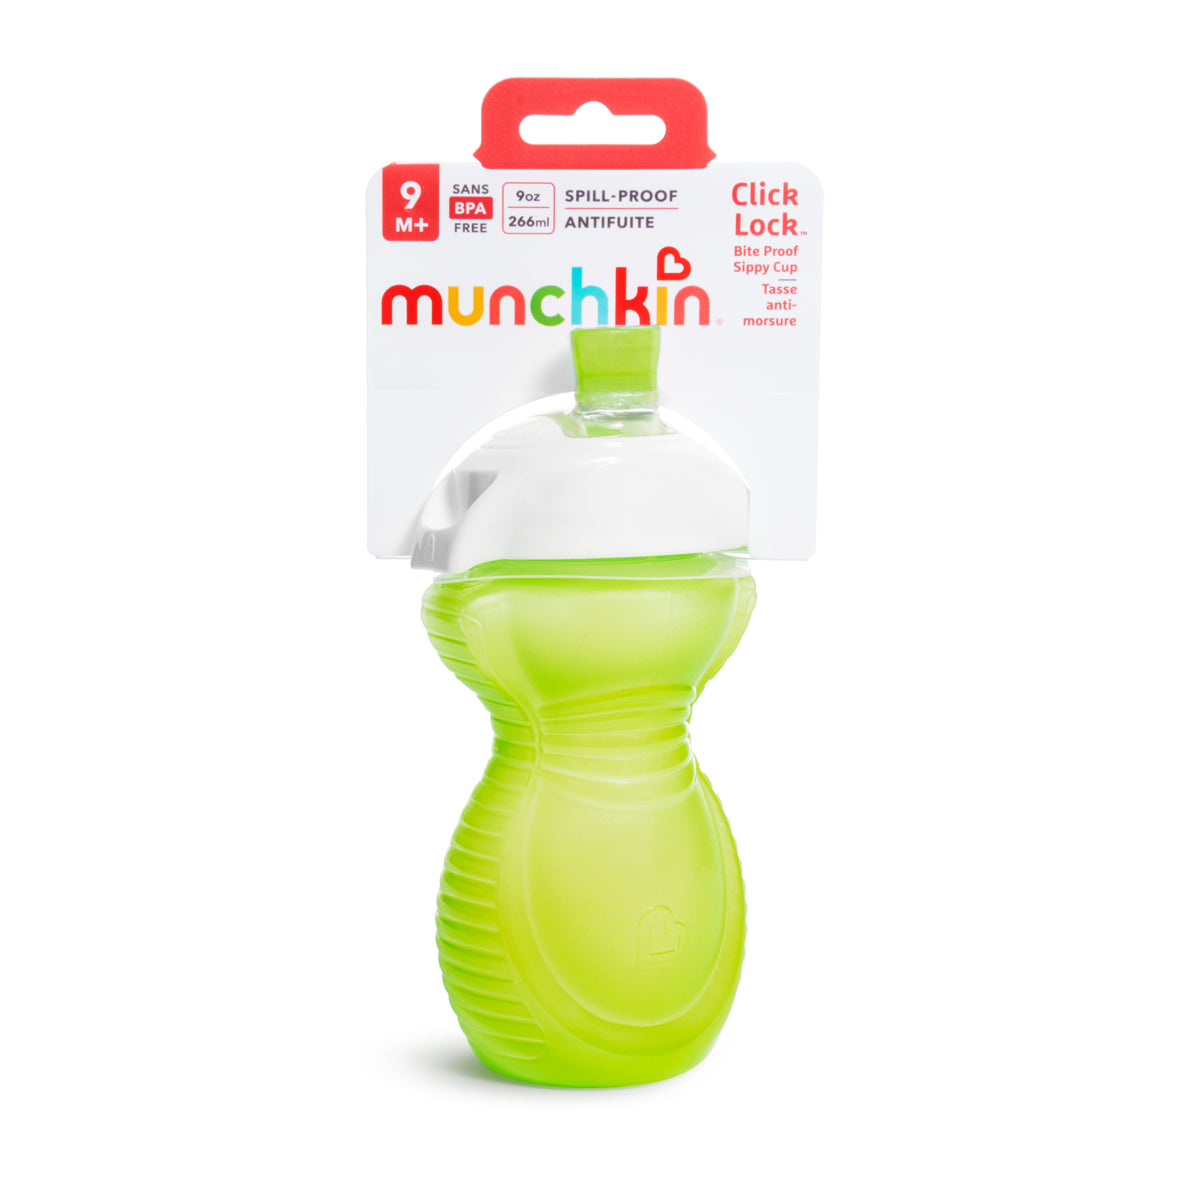 Click Lock™ Bite Proof Sippy Cup 266ml